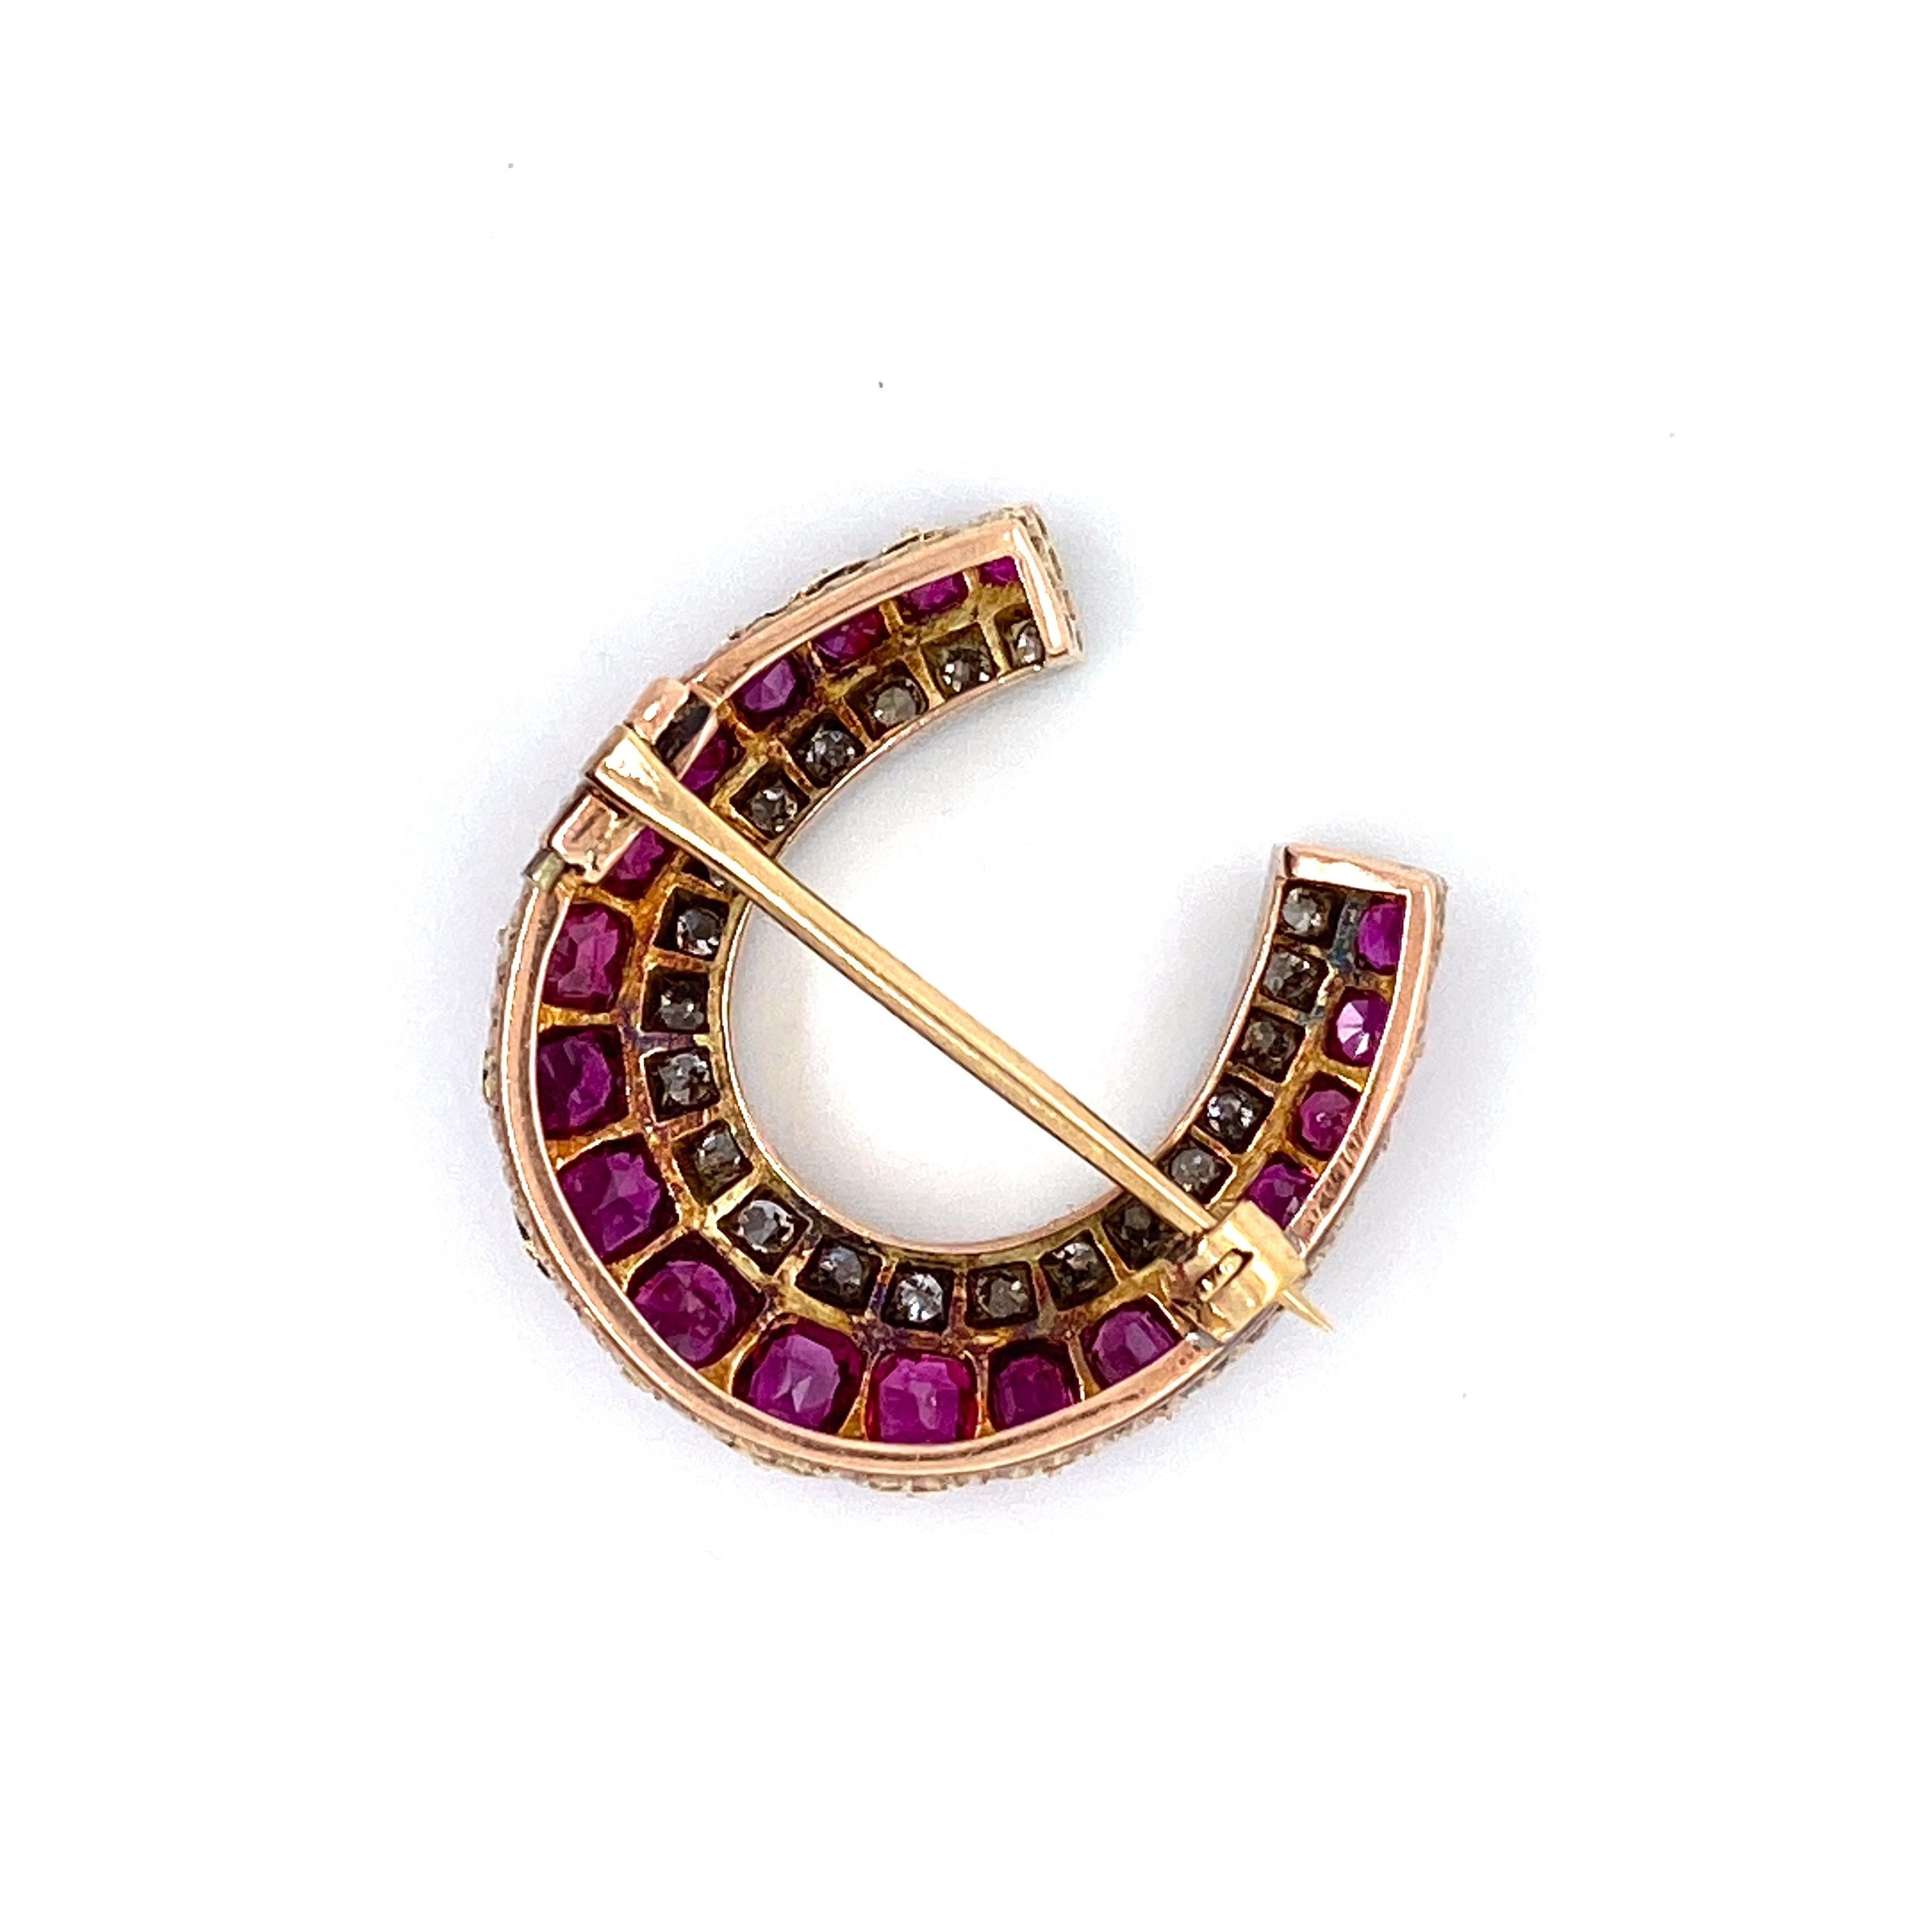 This brooch is stunning, maybe one for good luck or the horse lover - regardless anyone would be proud to wear this piece. Circa 1900's and expertly crafted from the era, featuring the most striking red/pink Burmese rubies, a total of 19 oval shaped